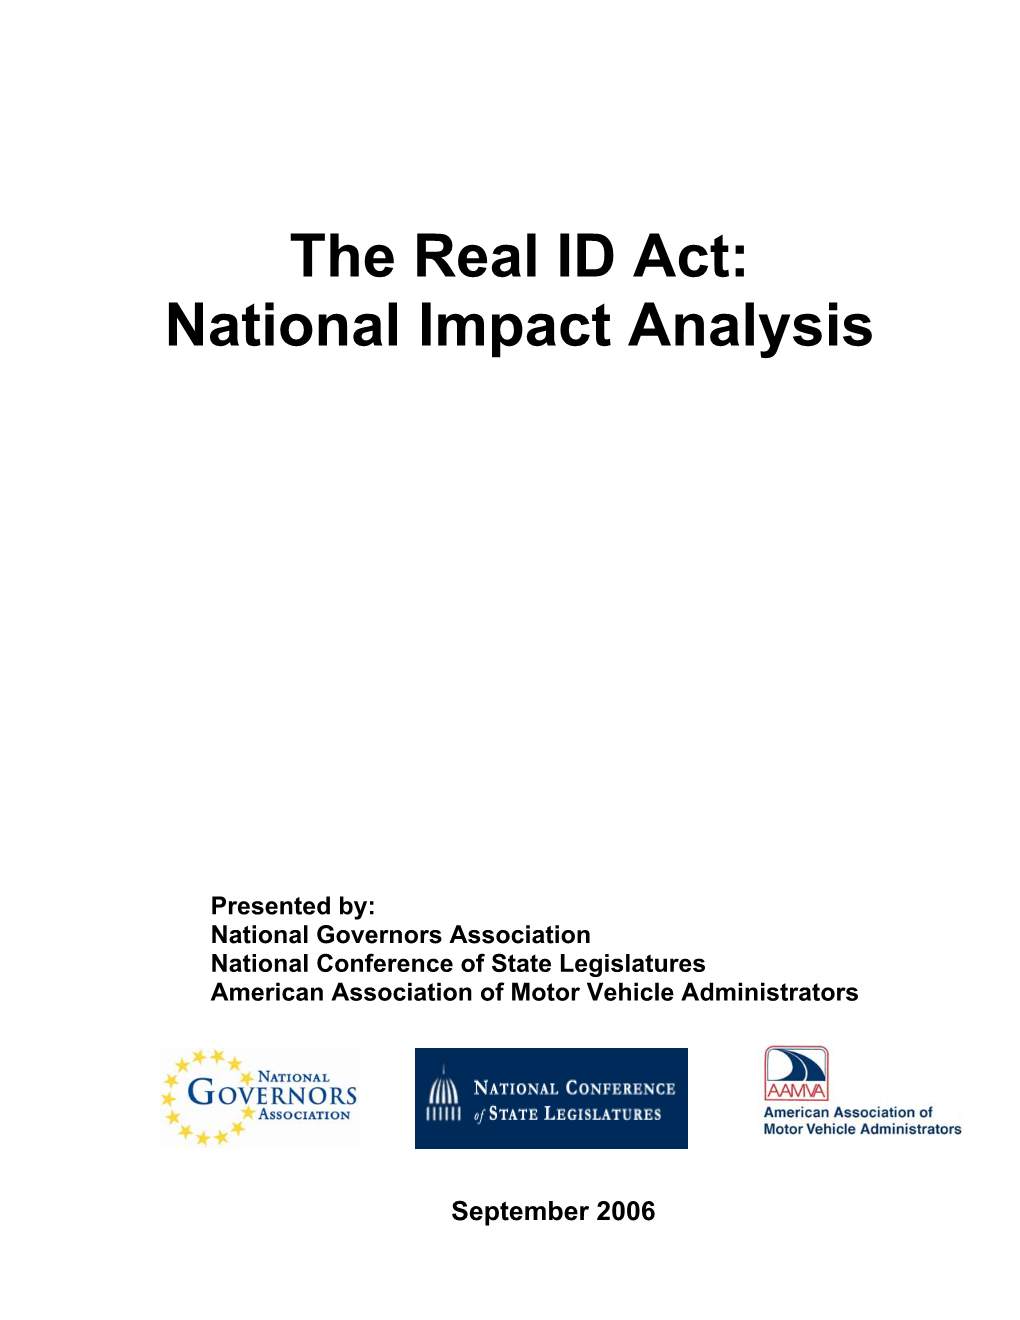 The Real ID Act: National Impact Analysis